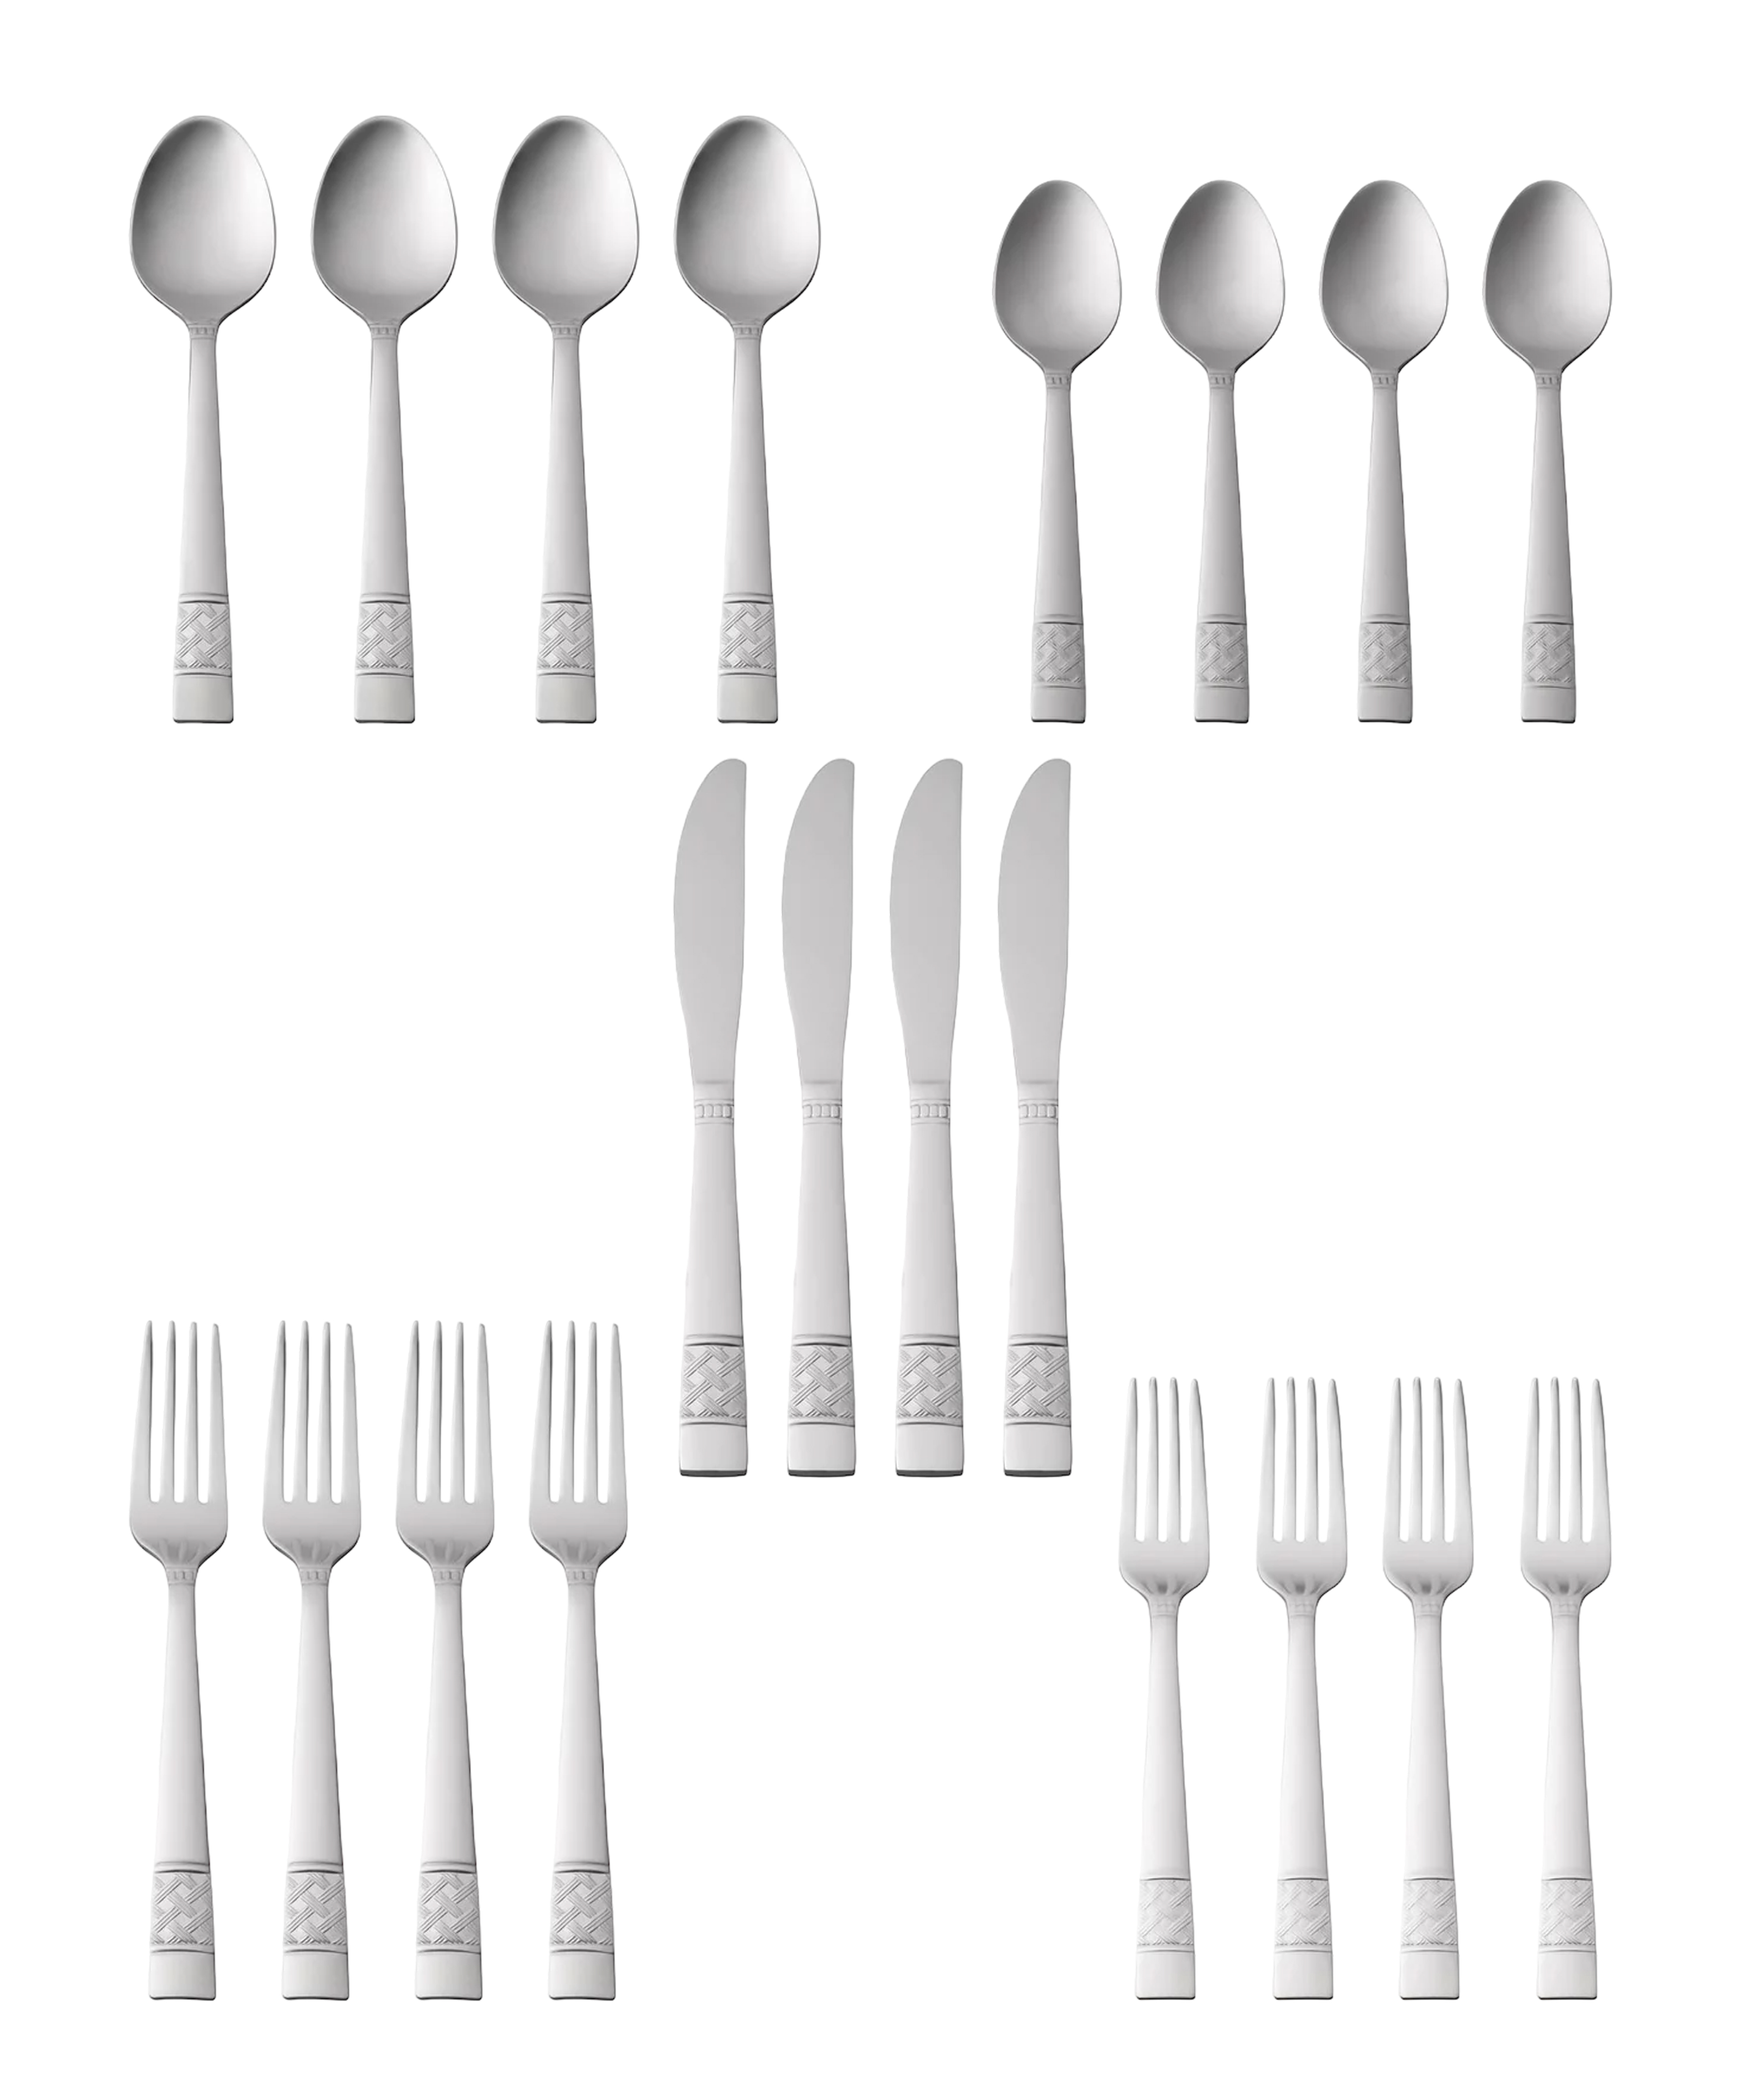 Mainstays Pierremont 20-Piece Stainless Steel Flatware Set, Silver, Service for 4 - image 1 of 11